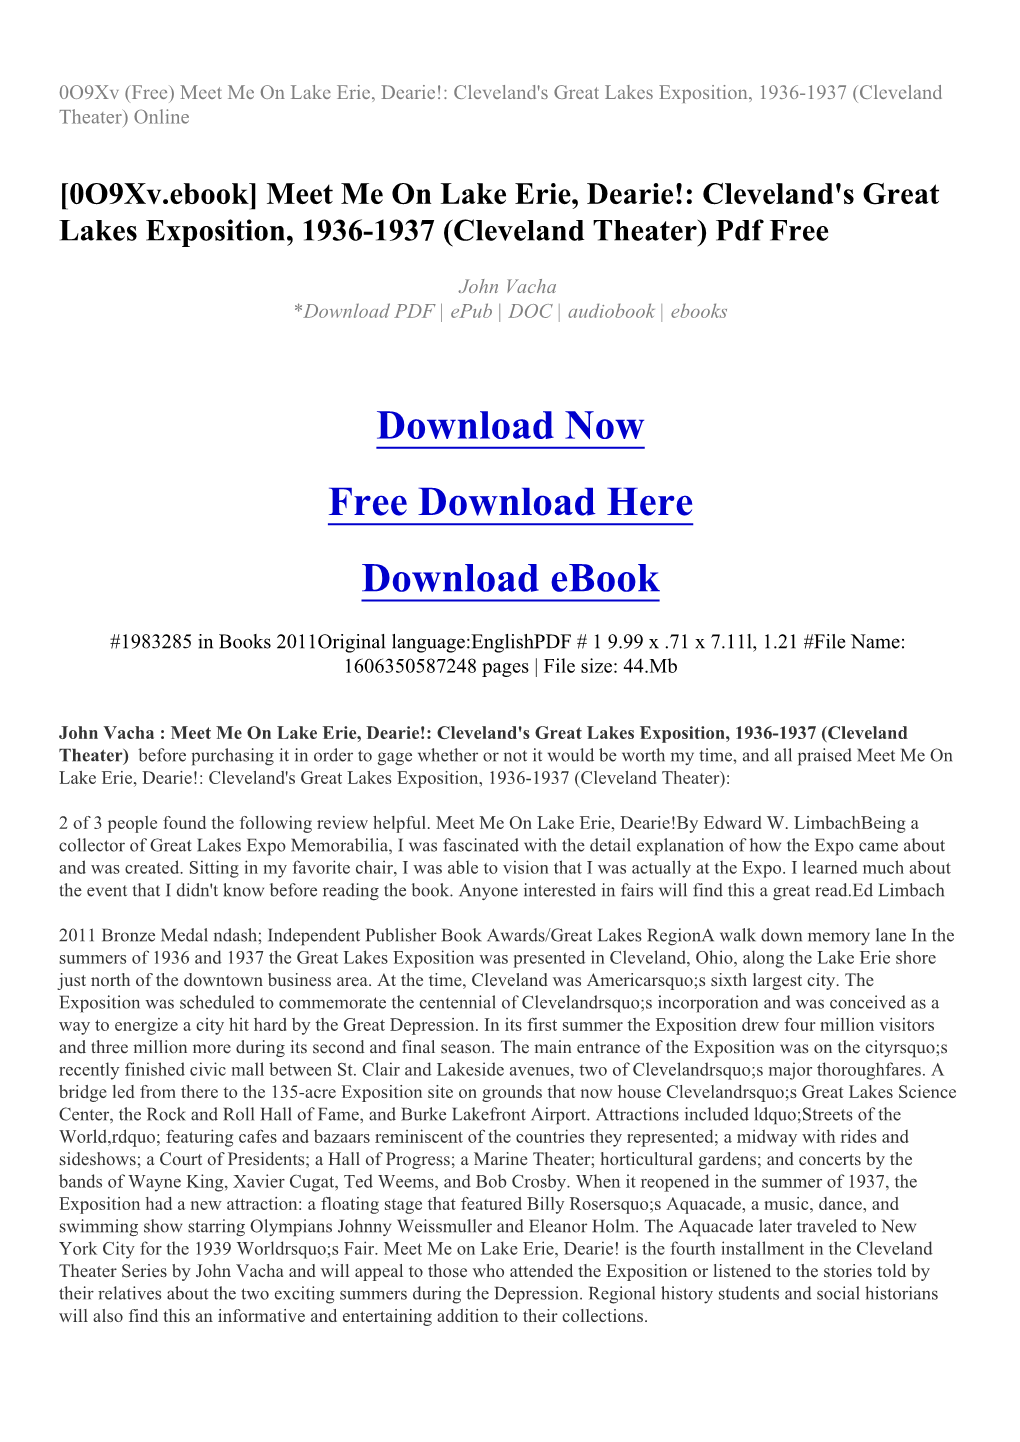 Meet Me on Lake Erie, Dearie!: Cleveland's Great Lakes Exposition, 1936-1937 (Cleveland Theater) Online